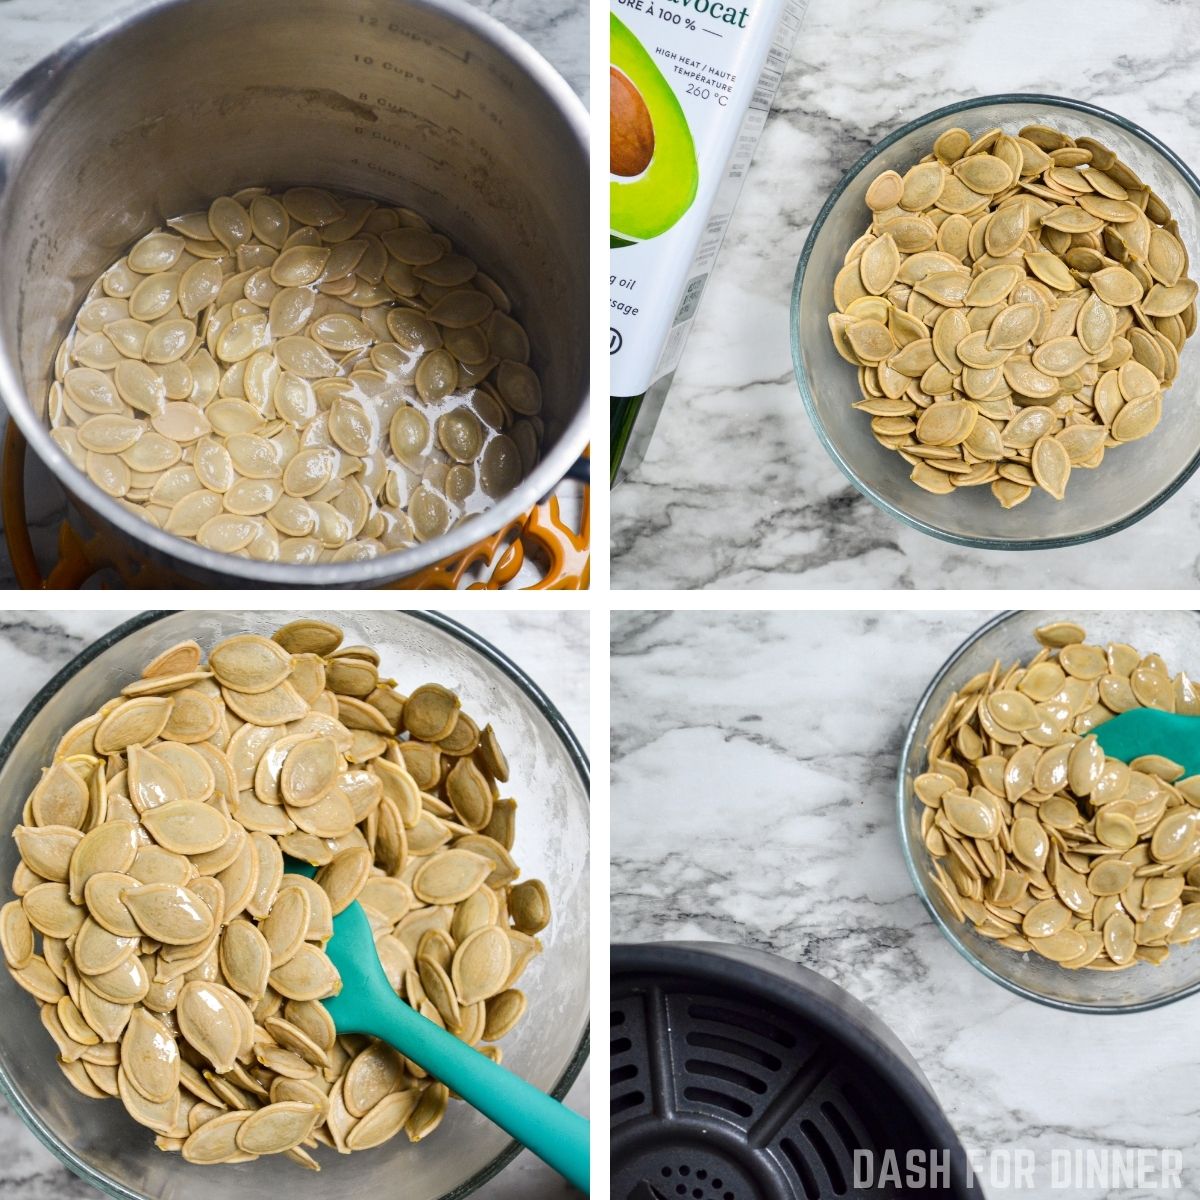 Seasoning pumpkin seeds with salt and tossing with oil before adding to an air fryer.